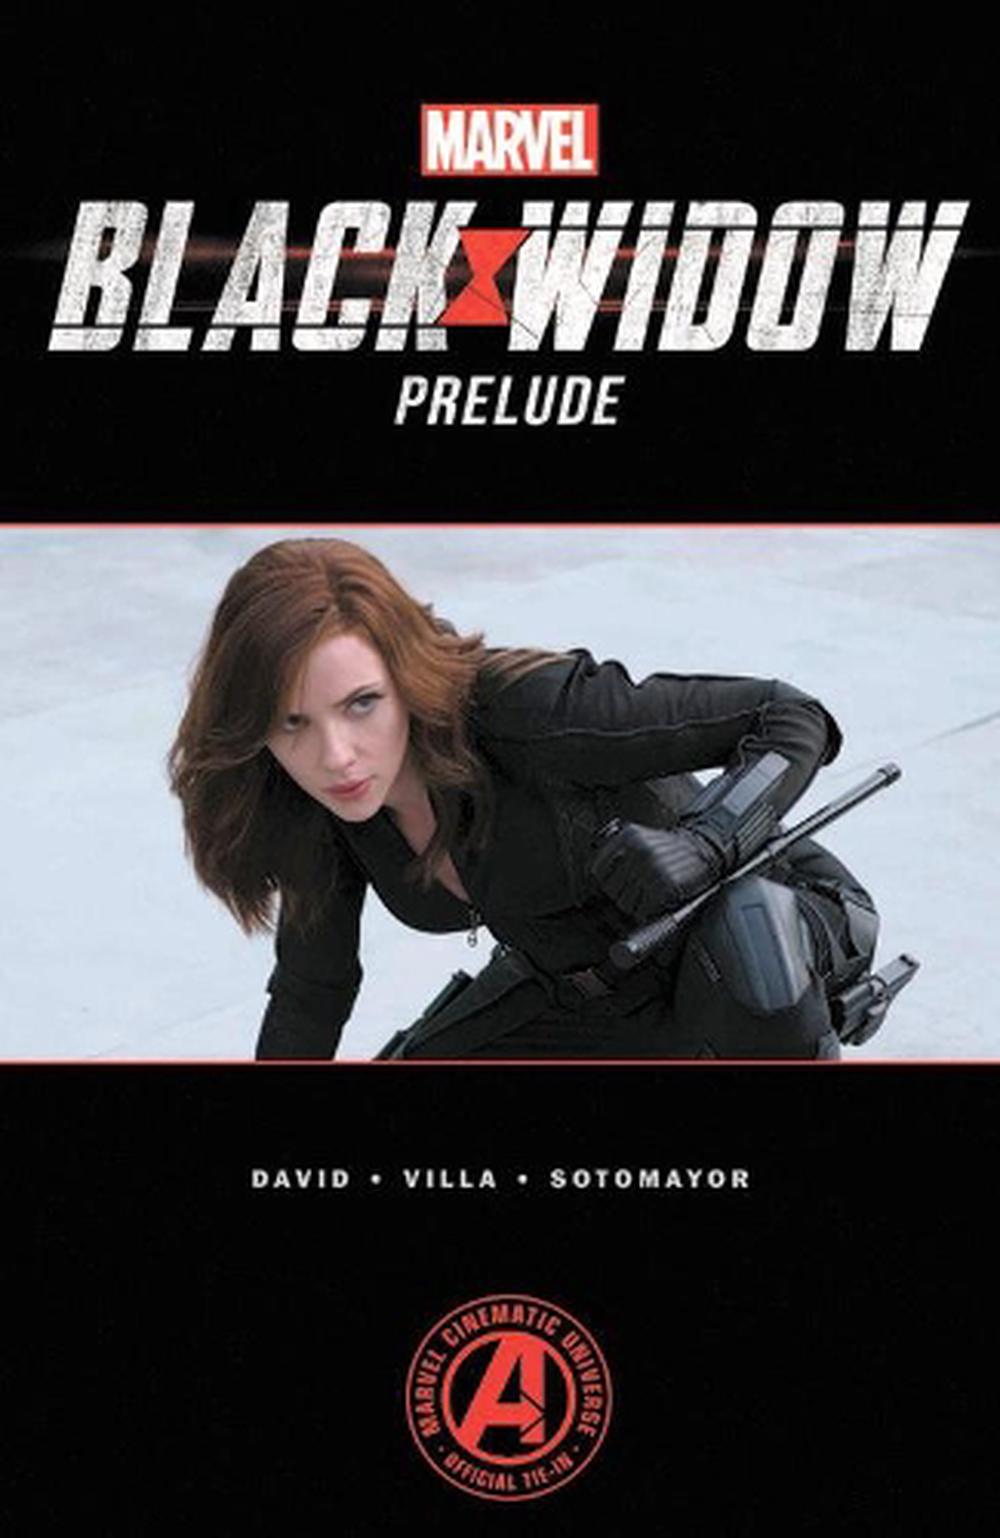 Marvel's　9781302921088　Prelude　at　The　Paperback,　by　Black　Comics,　online　Buy　Nile　Widow　Marvel